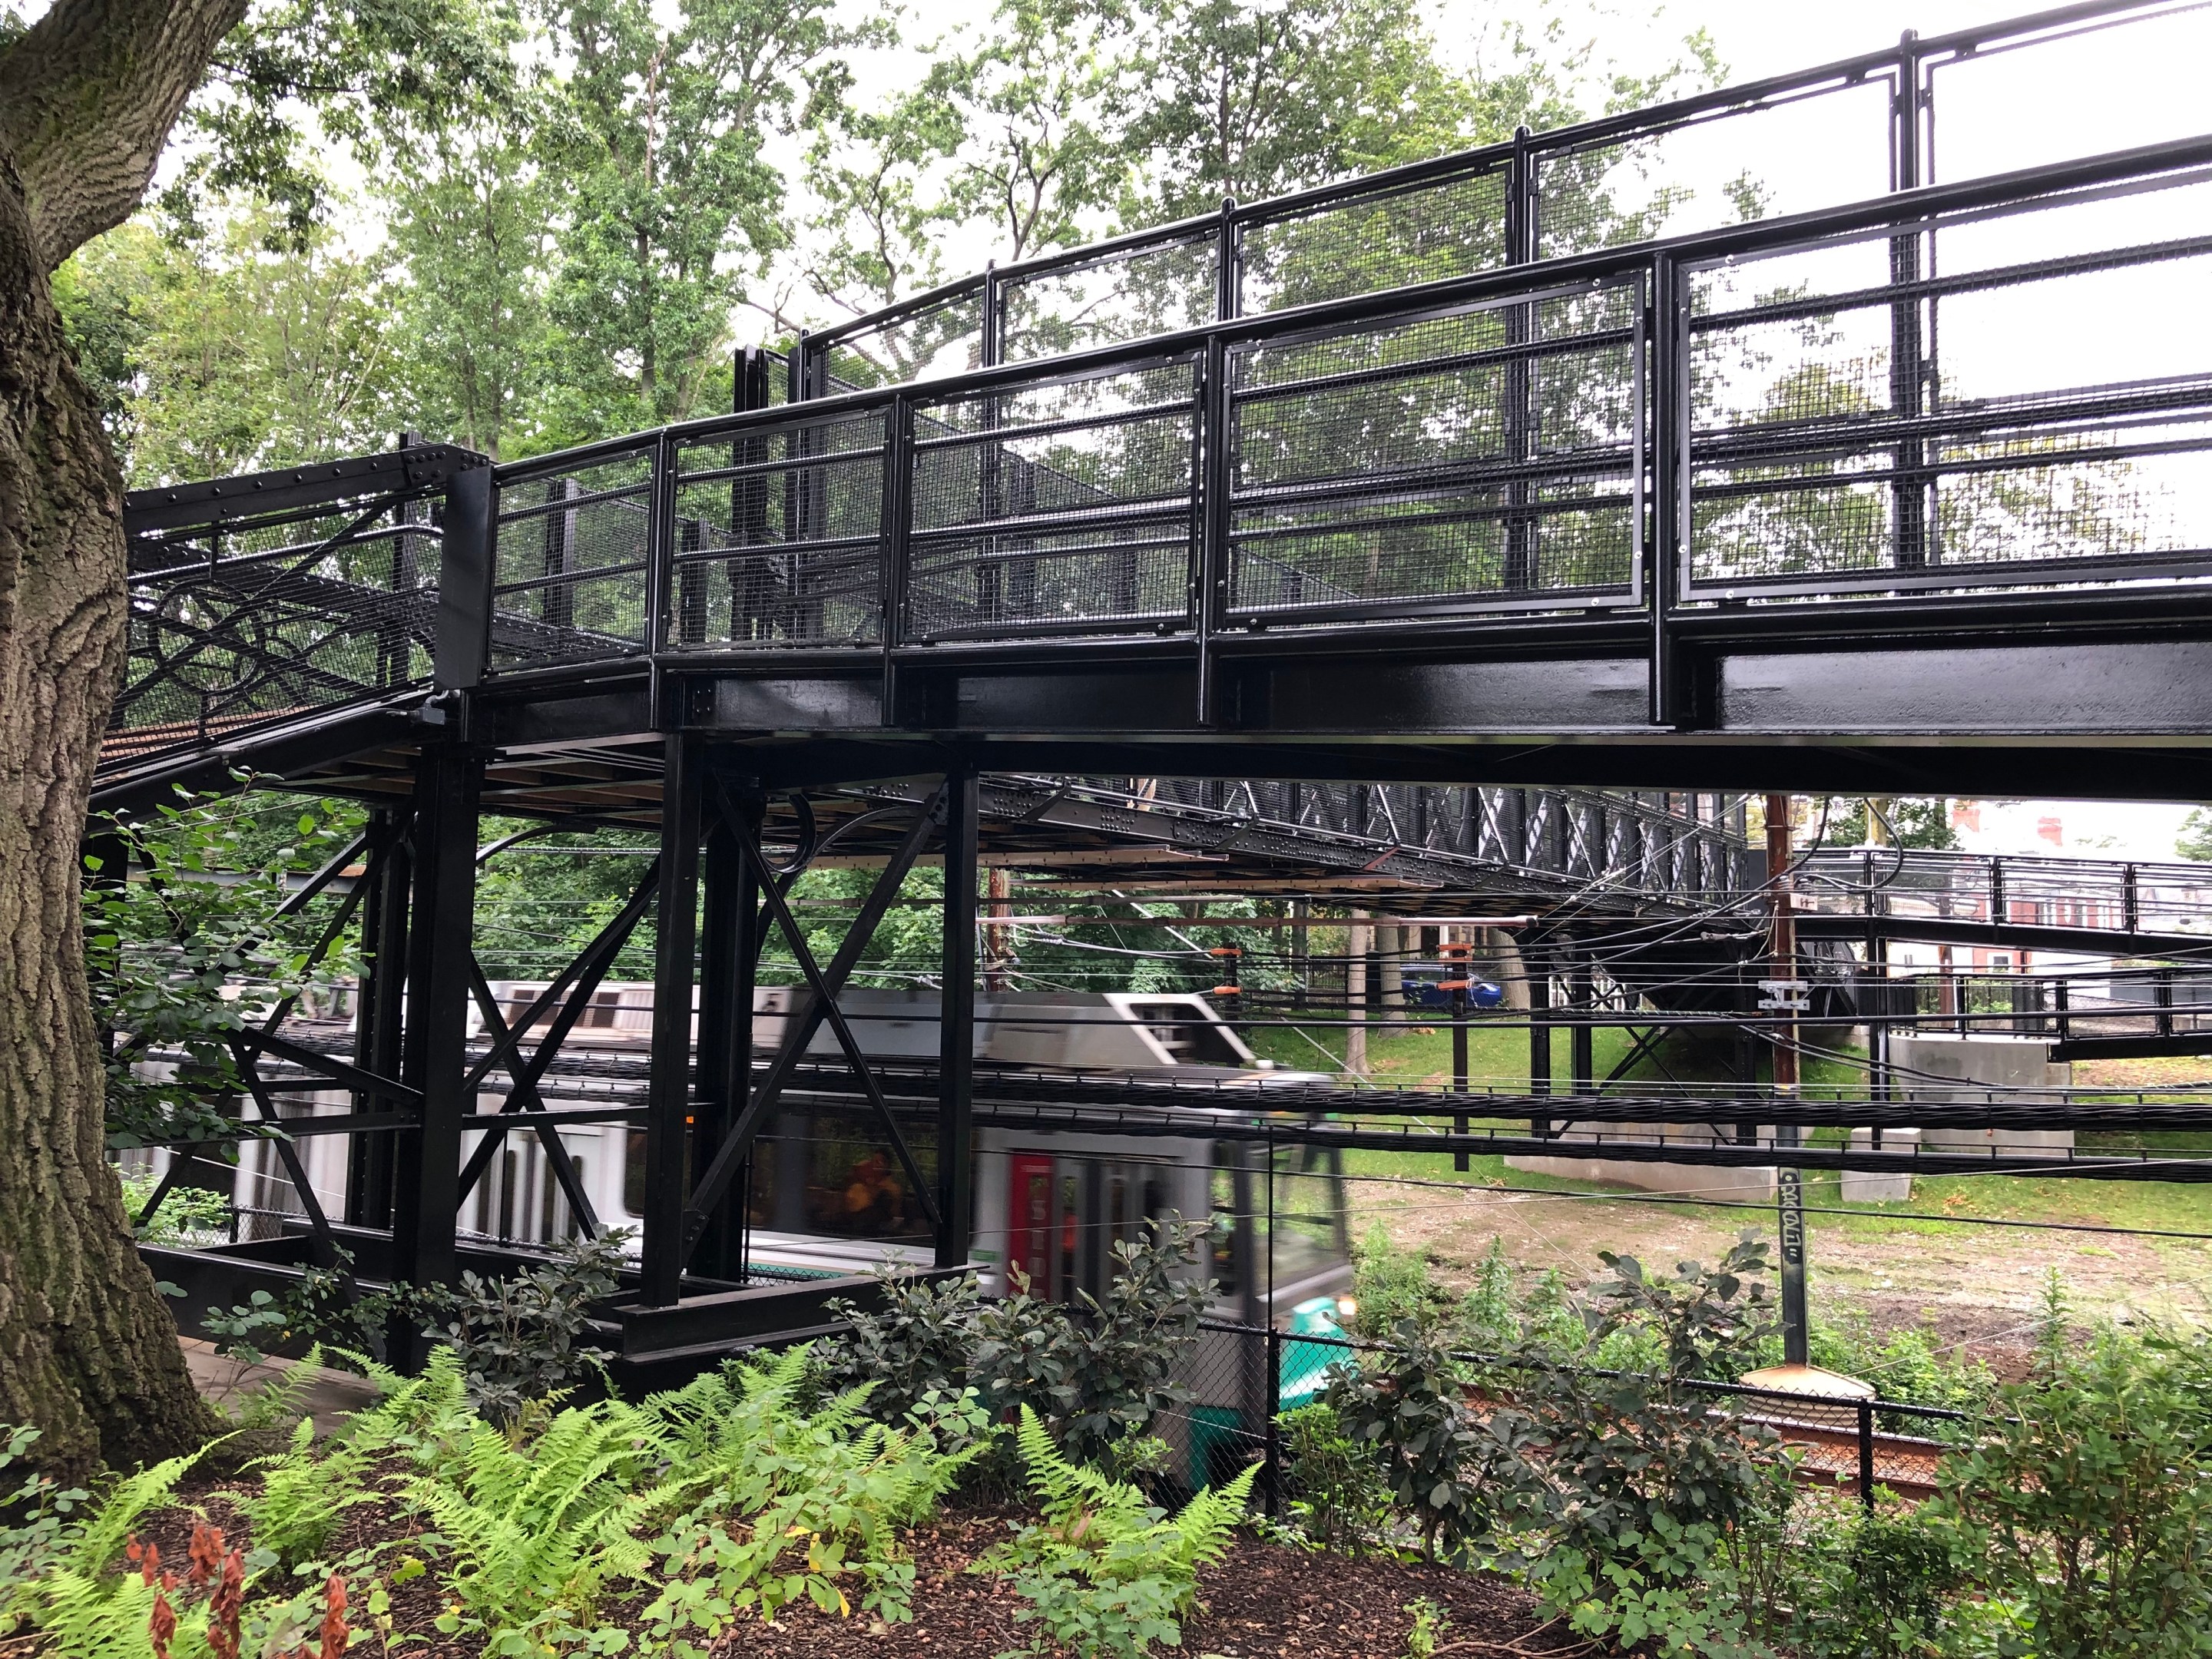 A Green Line train passes under a black metal bridge in a forest. A few brick houses are visible in the distance on the other side of the bridge.